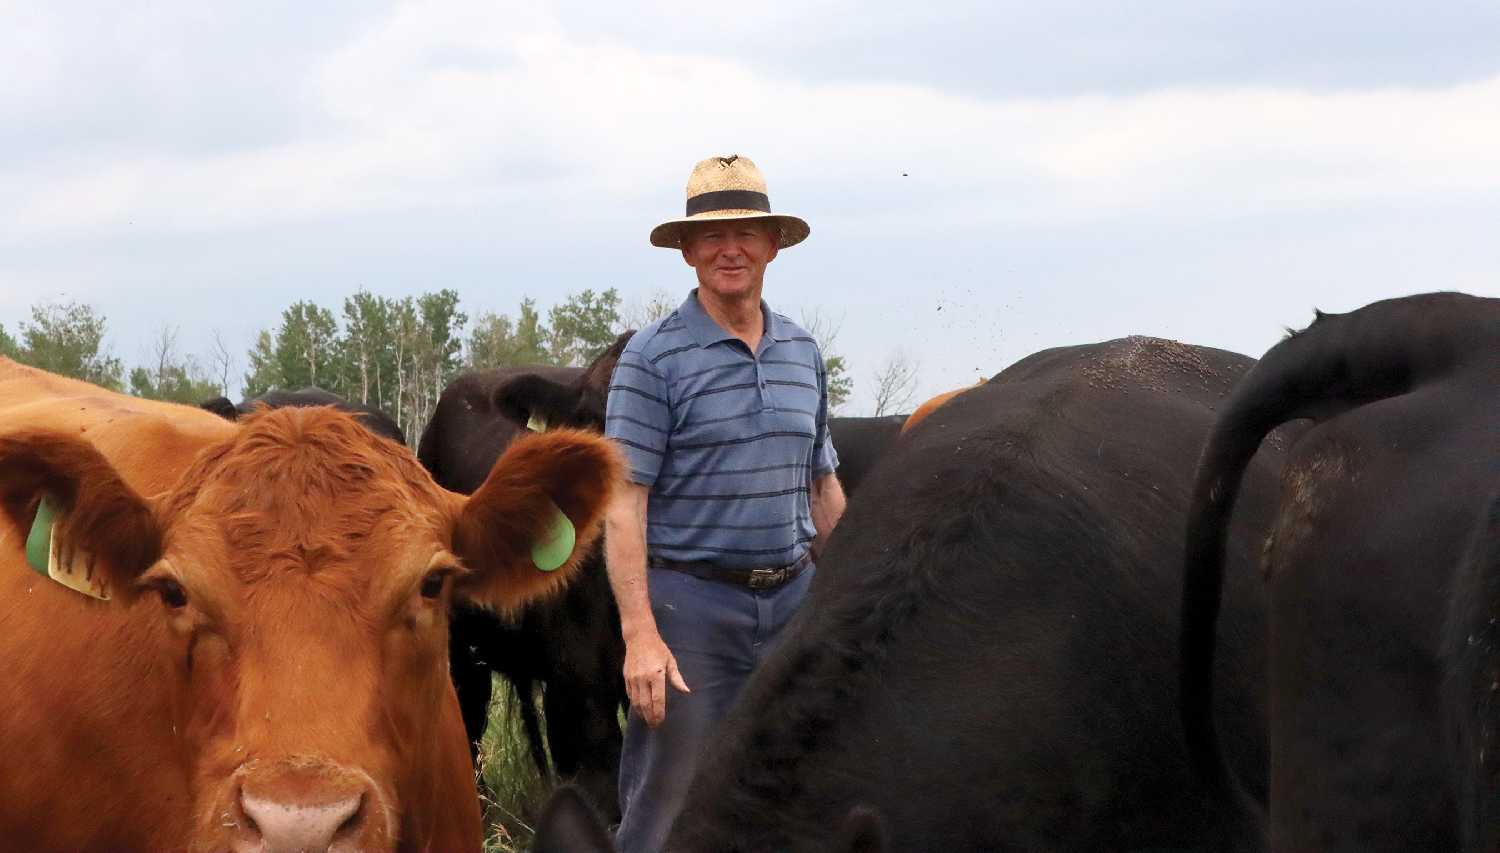 Elkhorn livestock producer David Schellenberg says he reduced his herd at the start of the season in anticipation of a dry year, which he says he hasnt seen since the 80s.